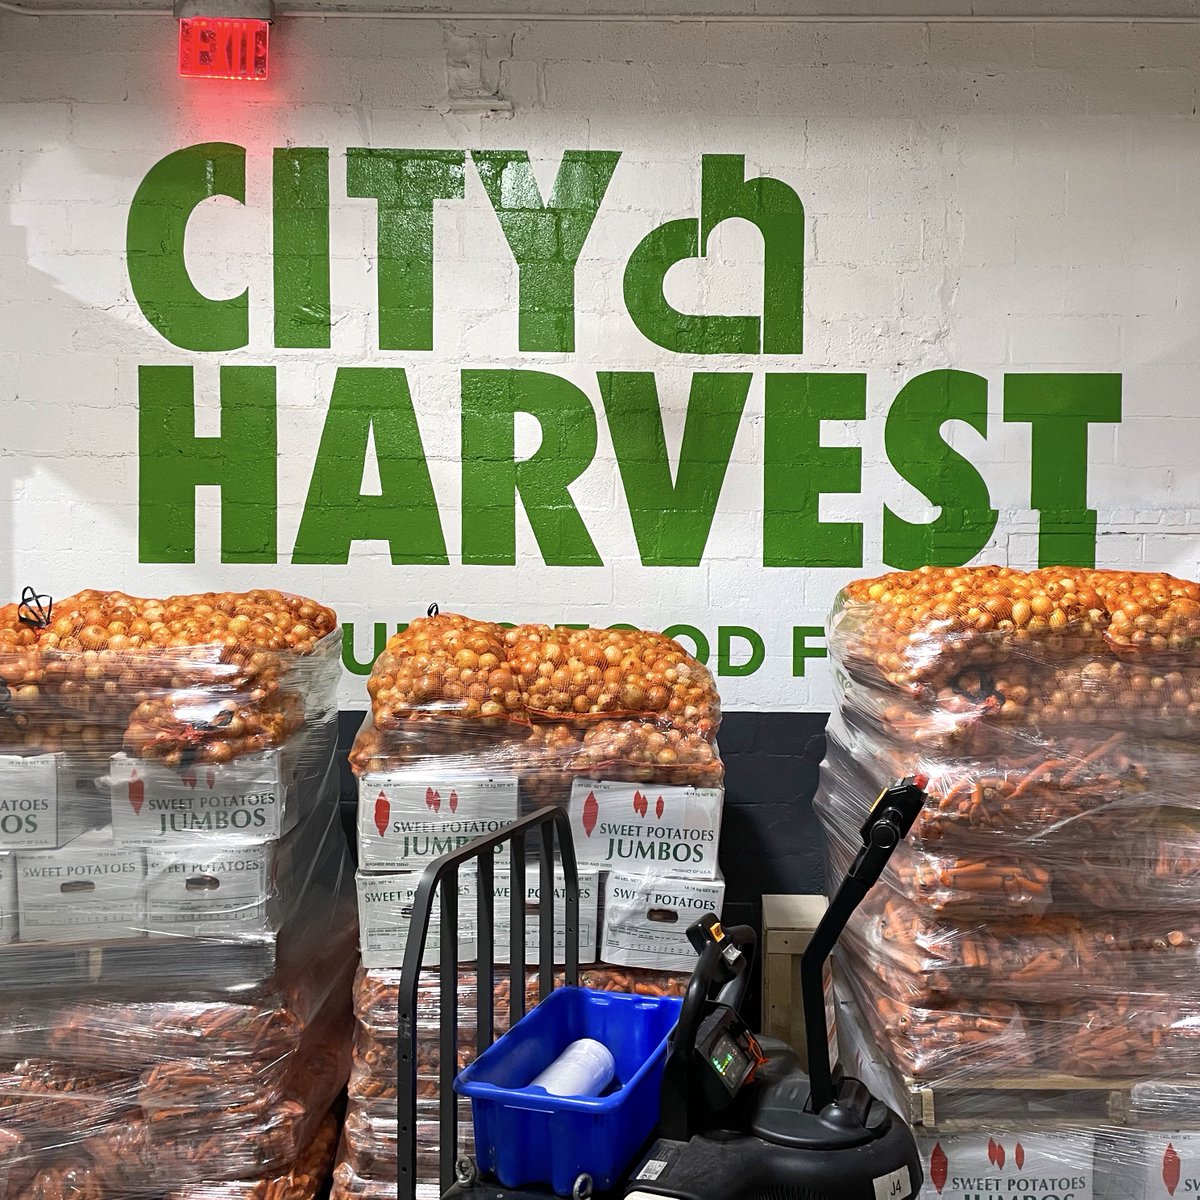 Sweet potatoes 🍠, onions 🧅, and carrots 🥕 ready to be loaded onto our food rescue trucks before being delivered to our partners across the five boroughs! 🚛💚 #WeAreCityHarvest 
via @CityHarvest